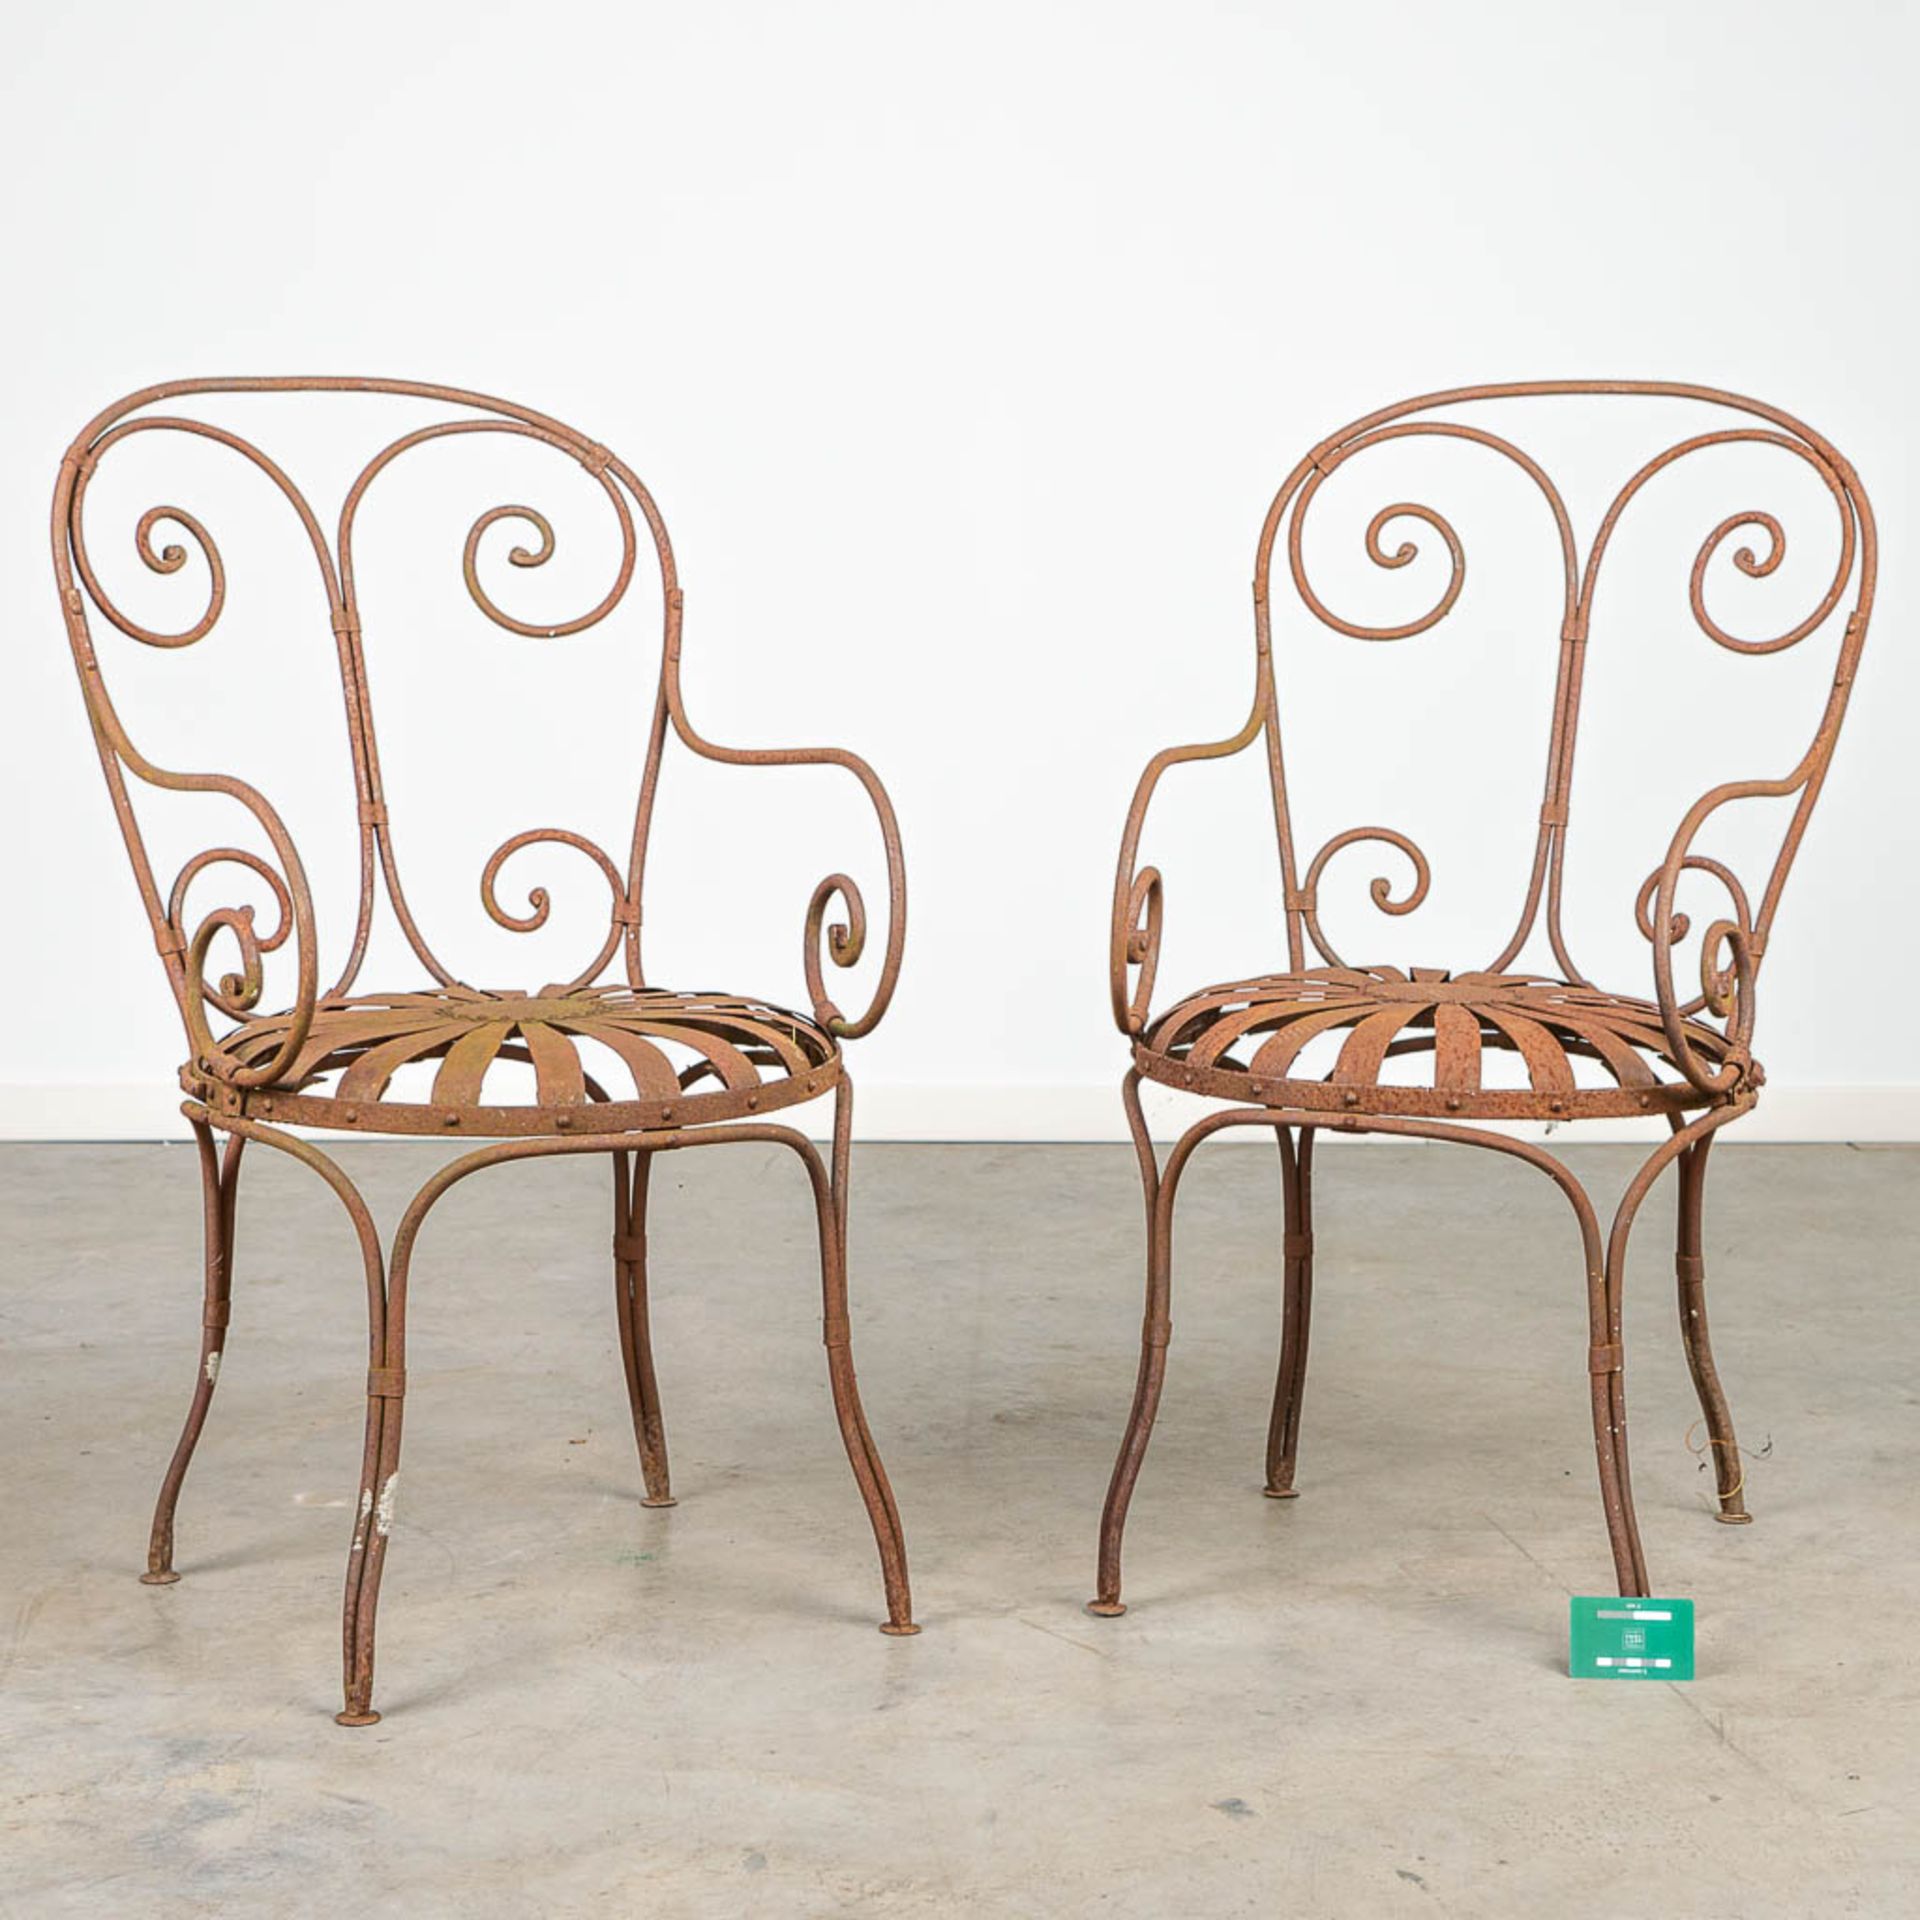 A pair of garden chairs made of wrought iron. - Image 3 of 6